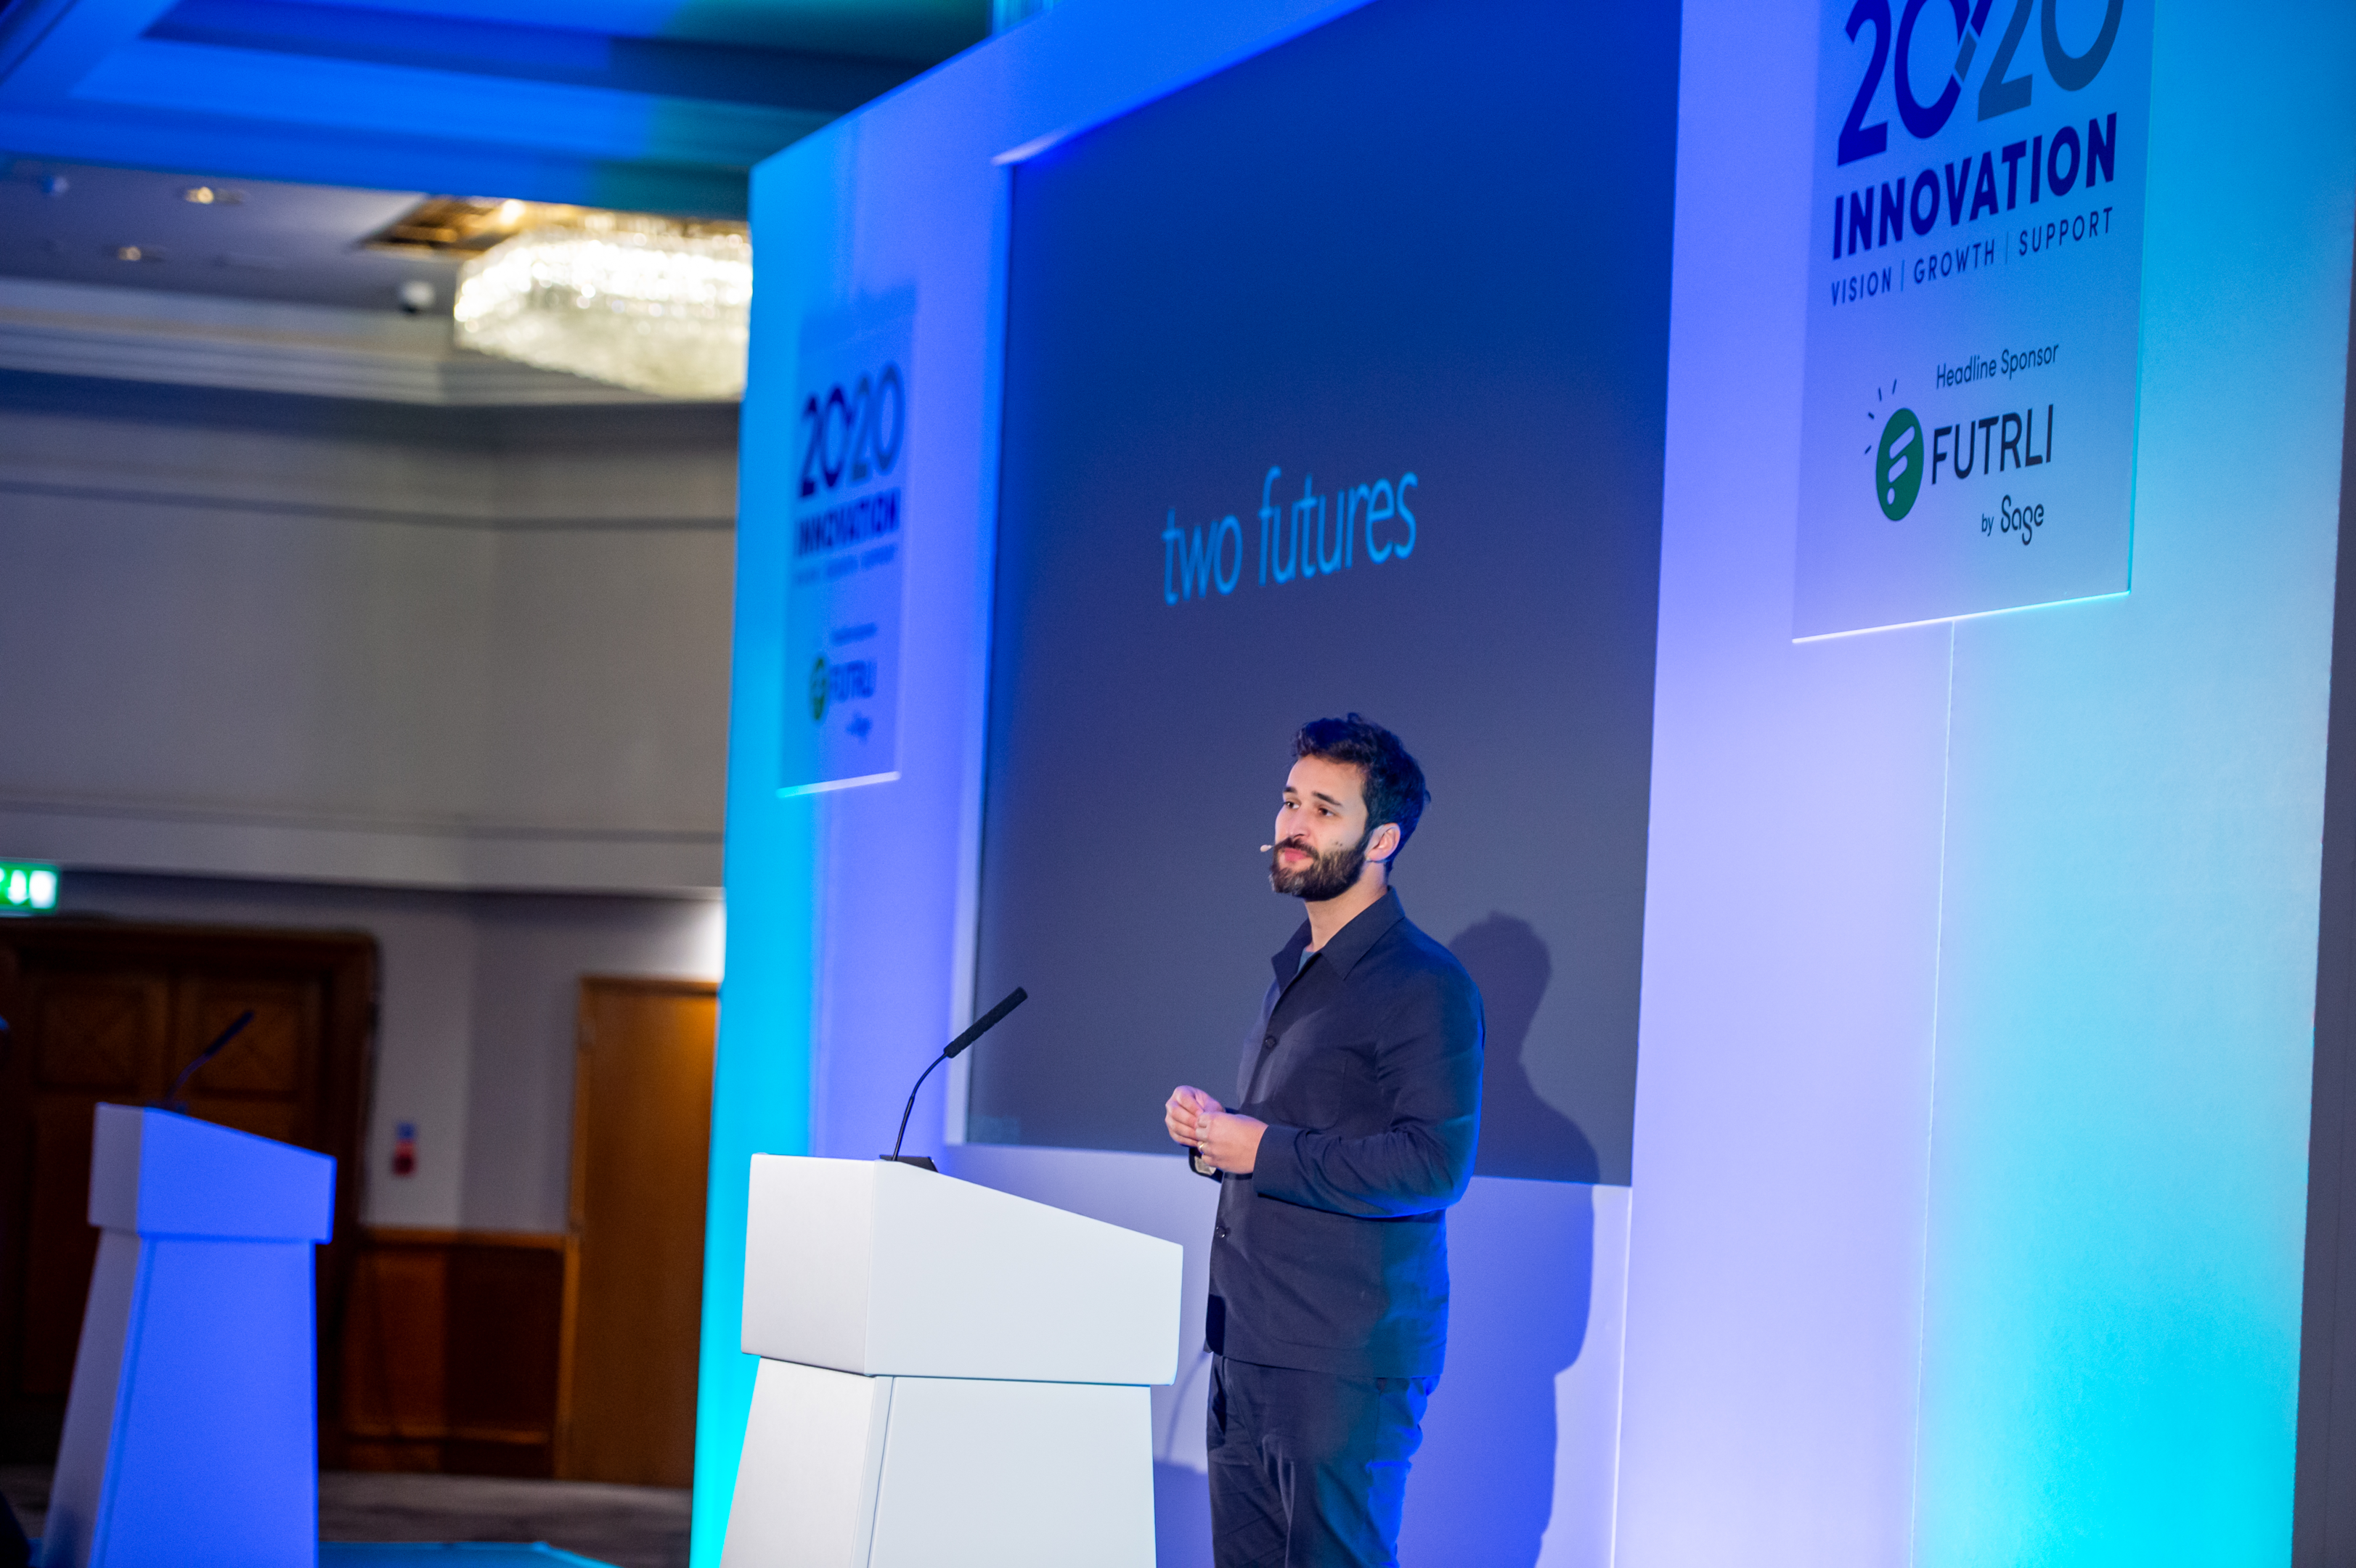 Dr Daniel Susskind at the 2020 Innovation Annual Conference